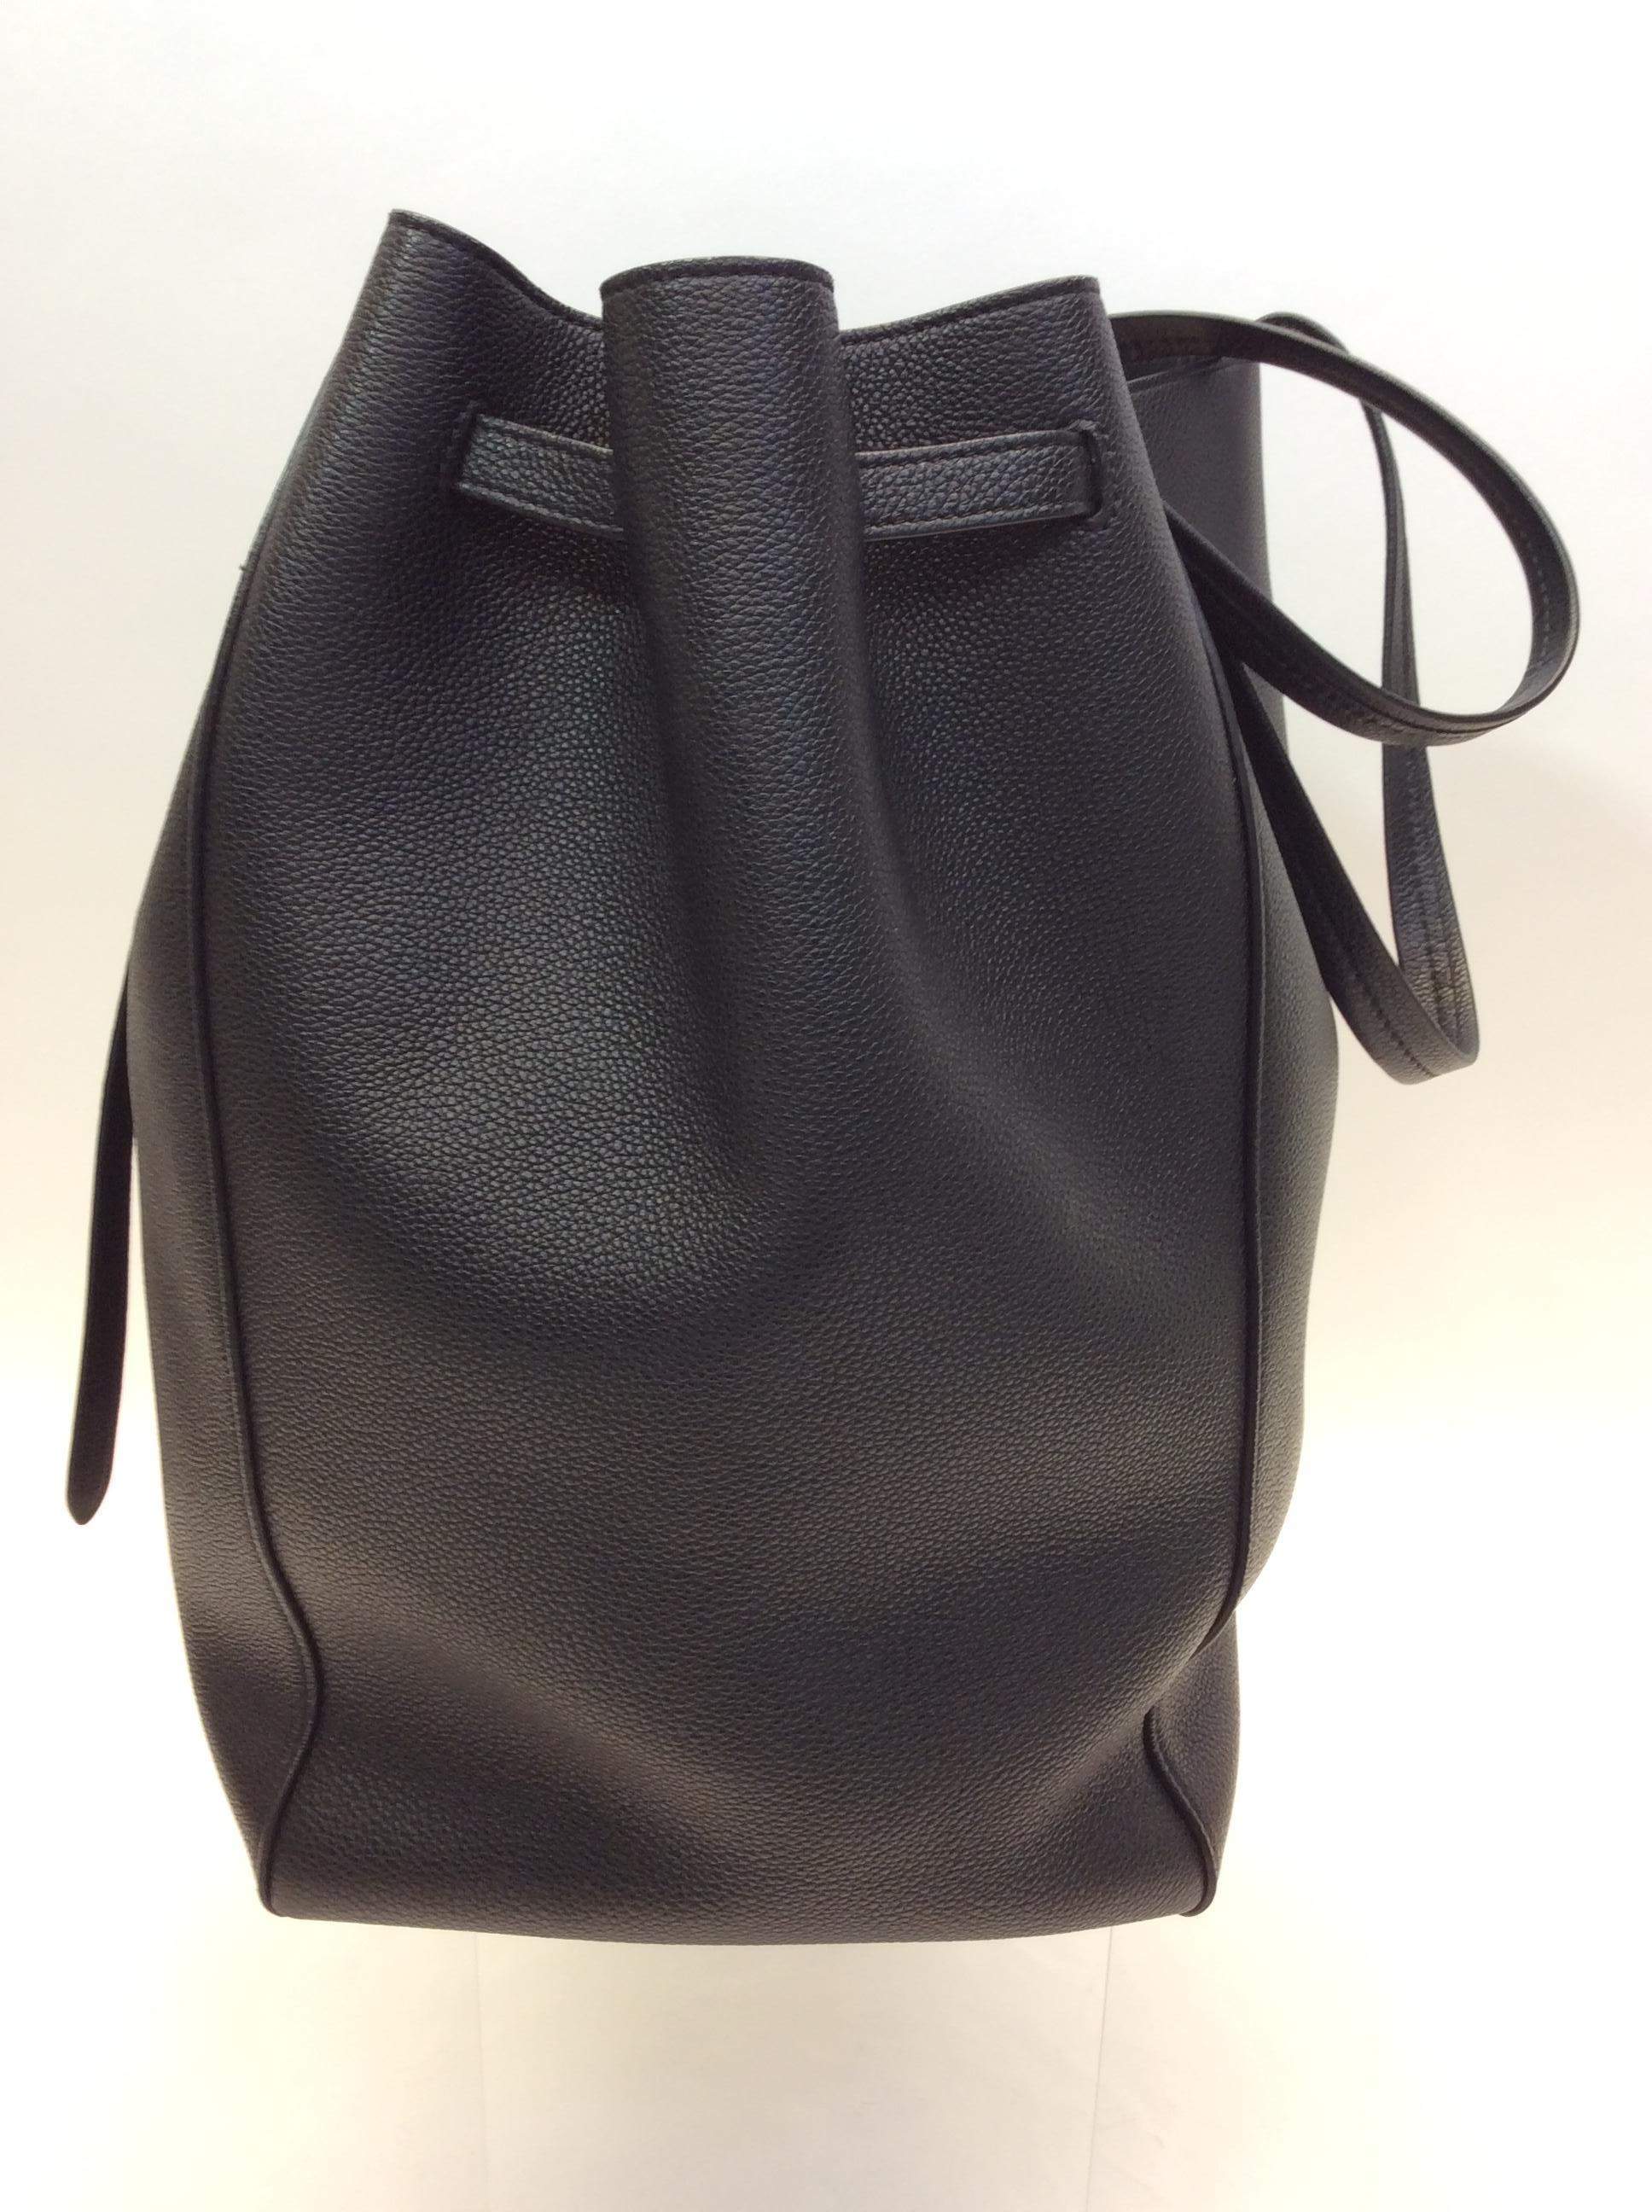 Celine Cabas Black Leather Tote
$1400
Made in Italy
Leather
13